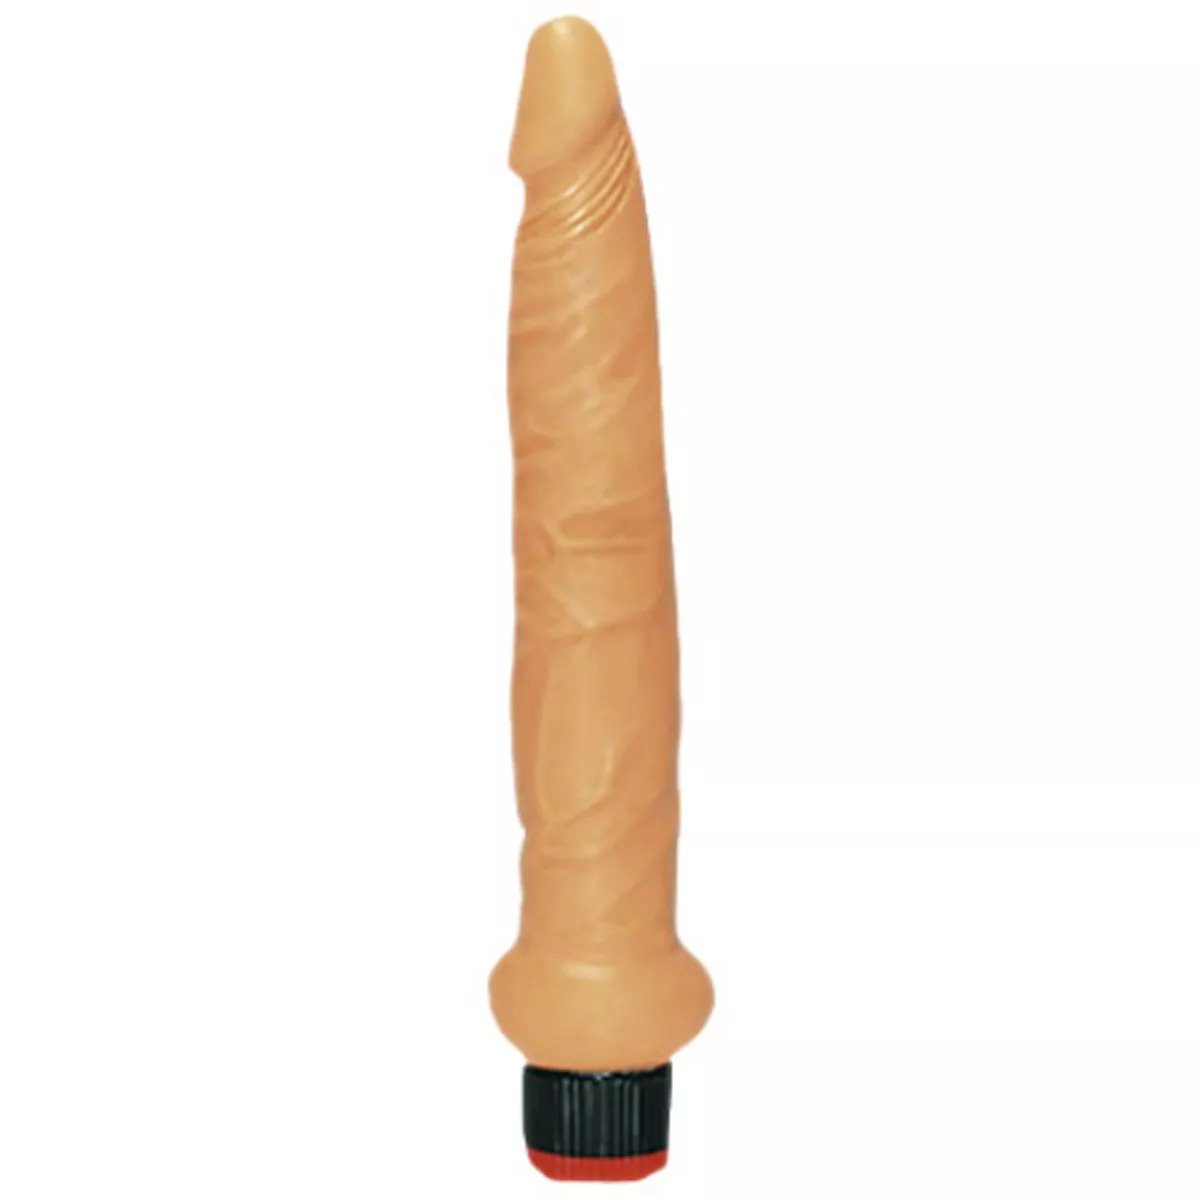 You2Toys Real Deal Anal Vibrator. Slide 1